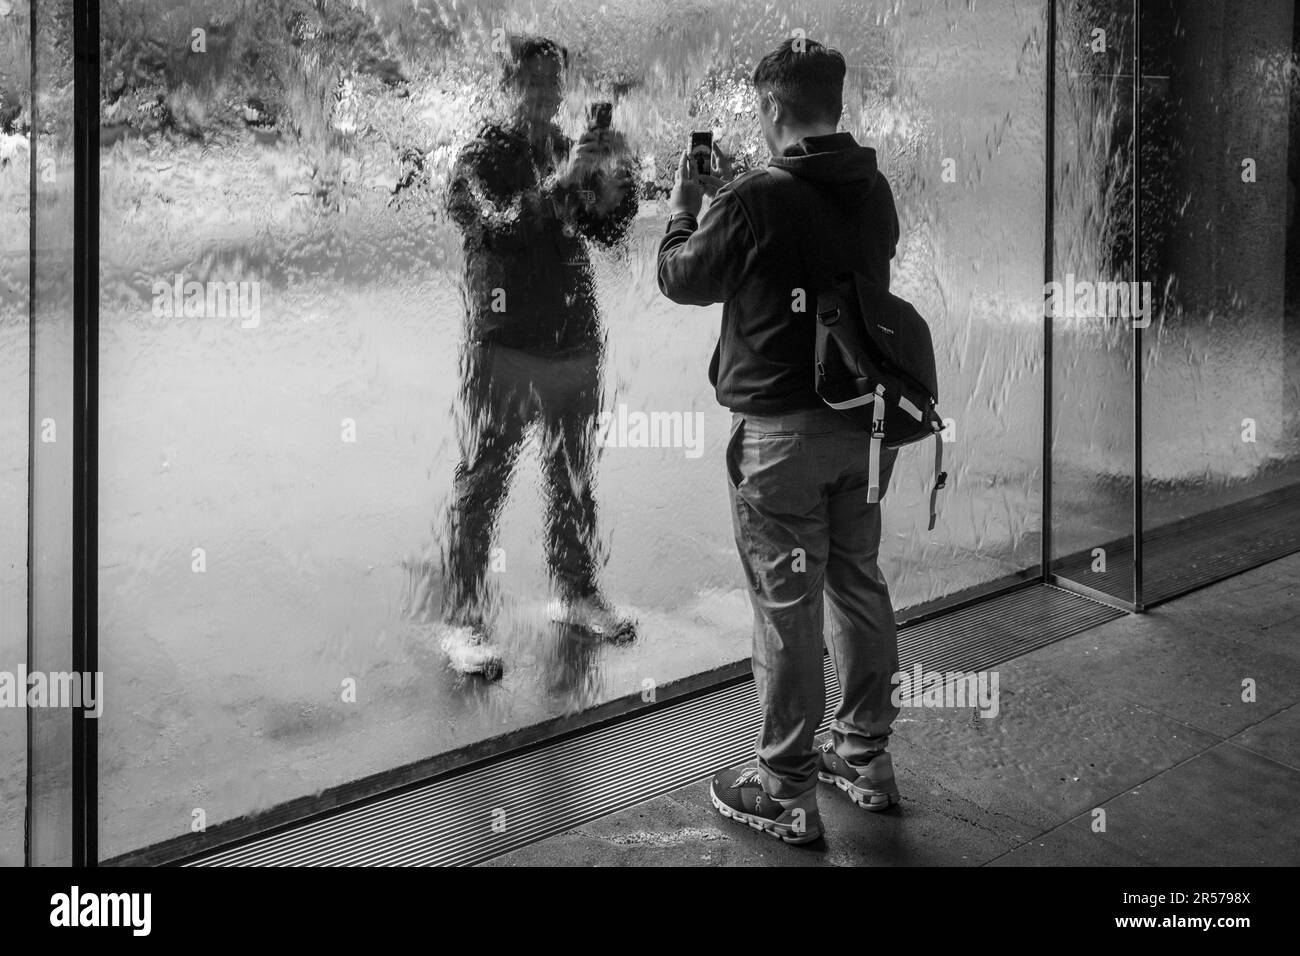 Visitors photograph each other through the Waterwall at the National Gallery of Victoria, Melbourne, Australia Stock Photo